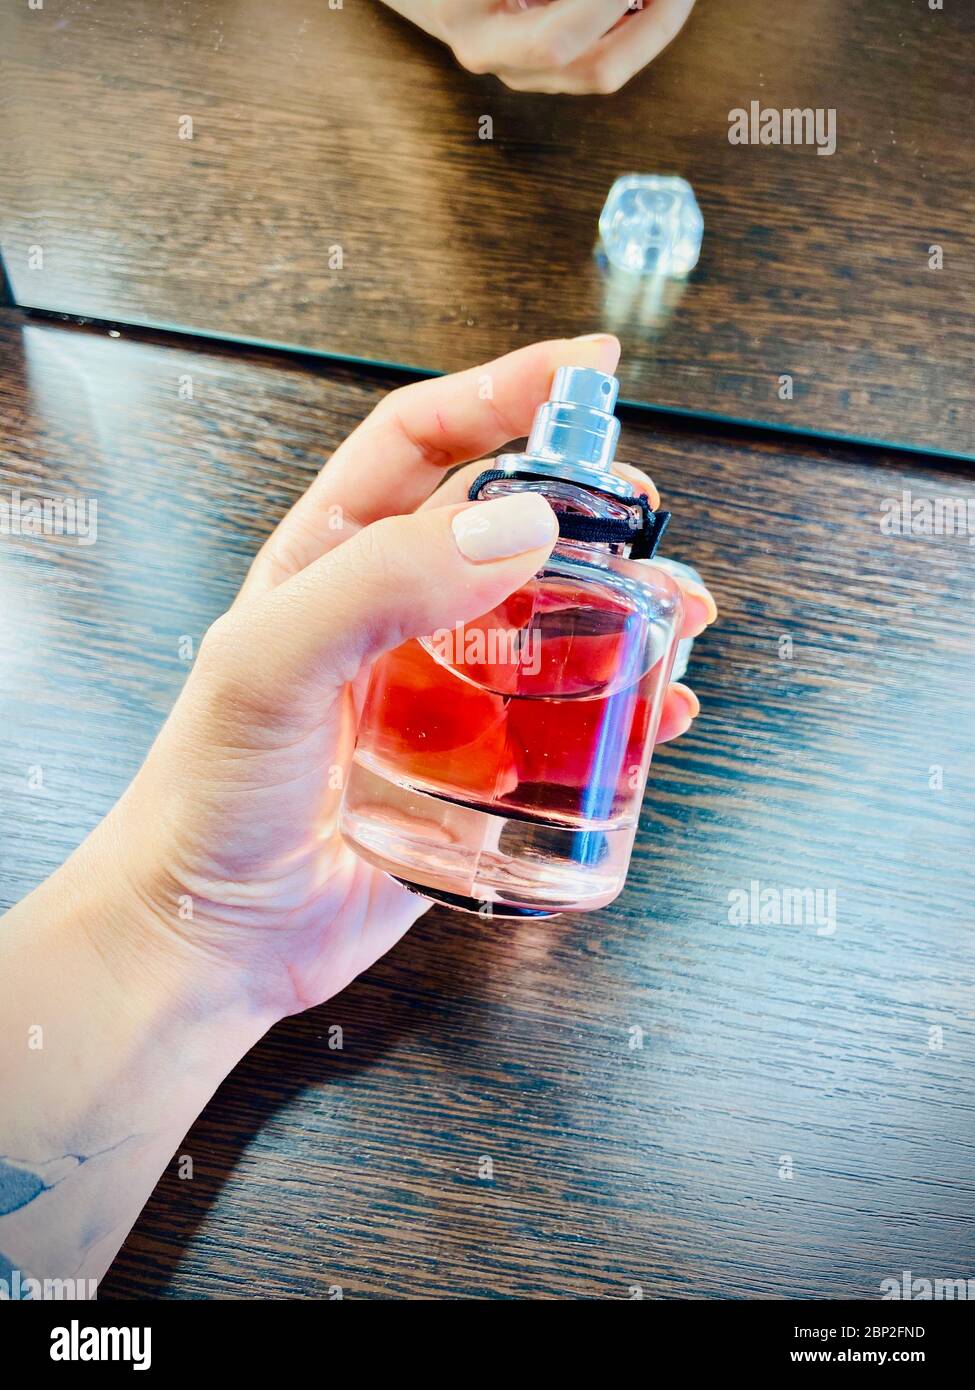 A hand holding a plastic water bottle on a table Stock Photo